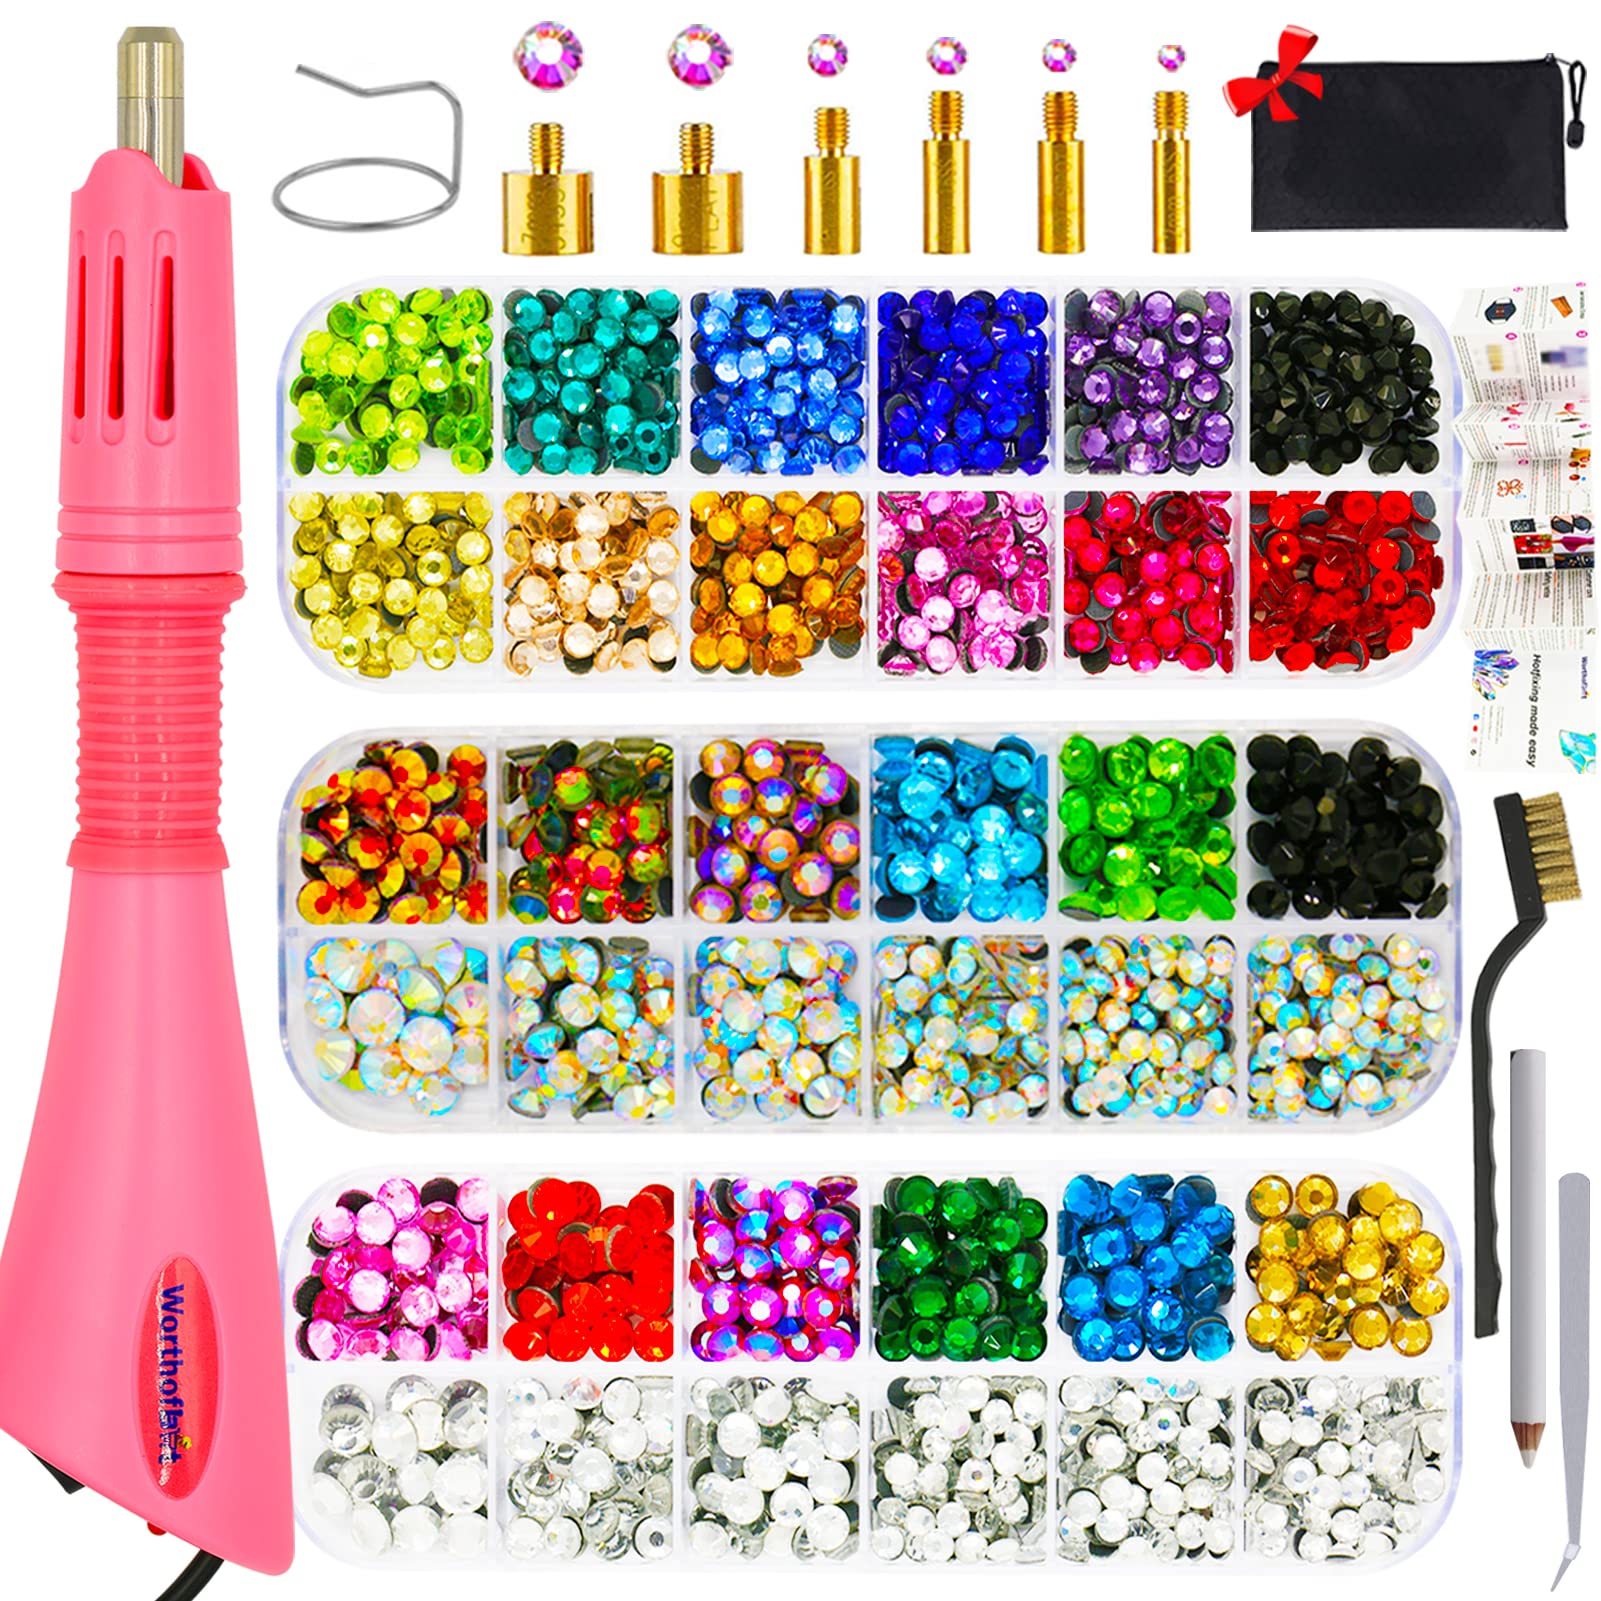 Worthofbest Rhinestones for Clothes Crafts Bedazzler Kit